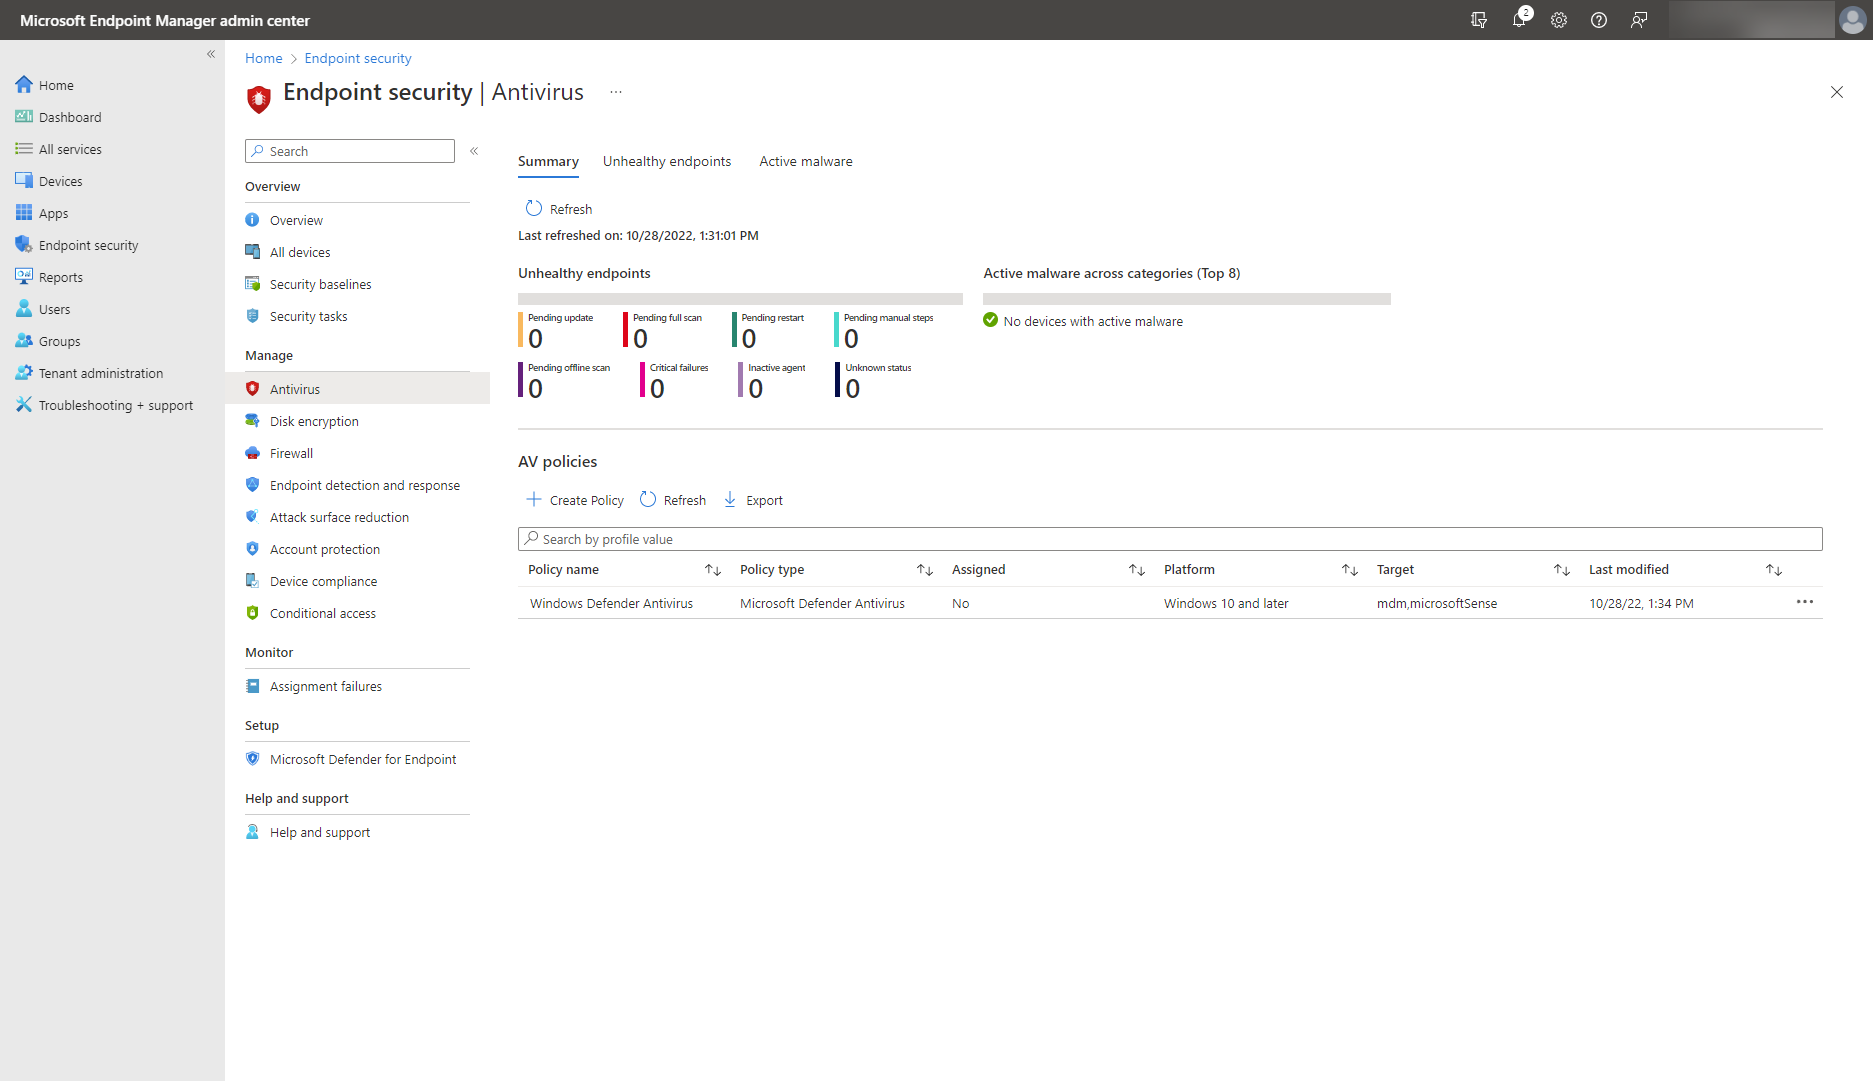 A screenshot shows the Antivirus summary view of Endpoint security.